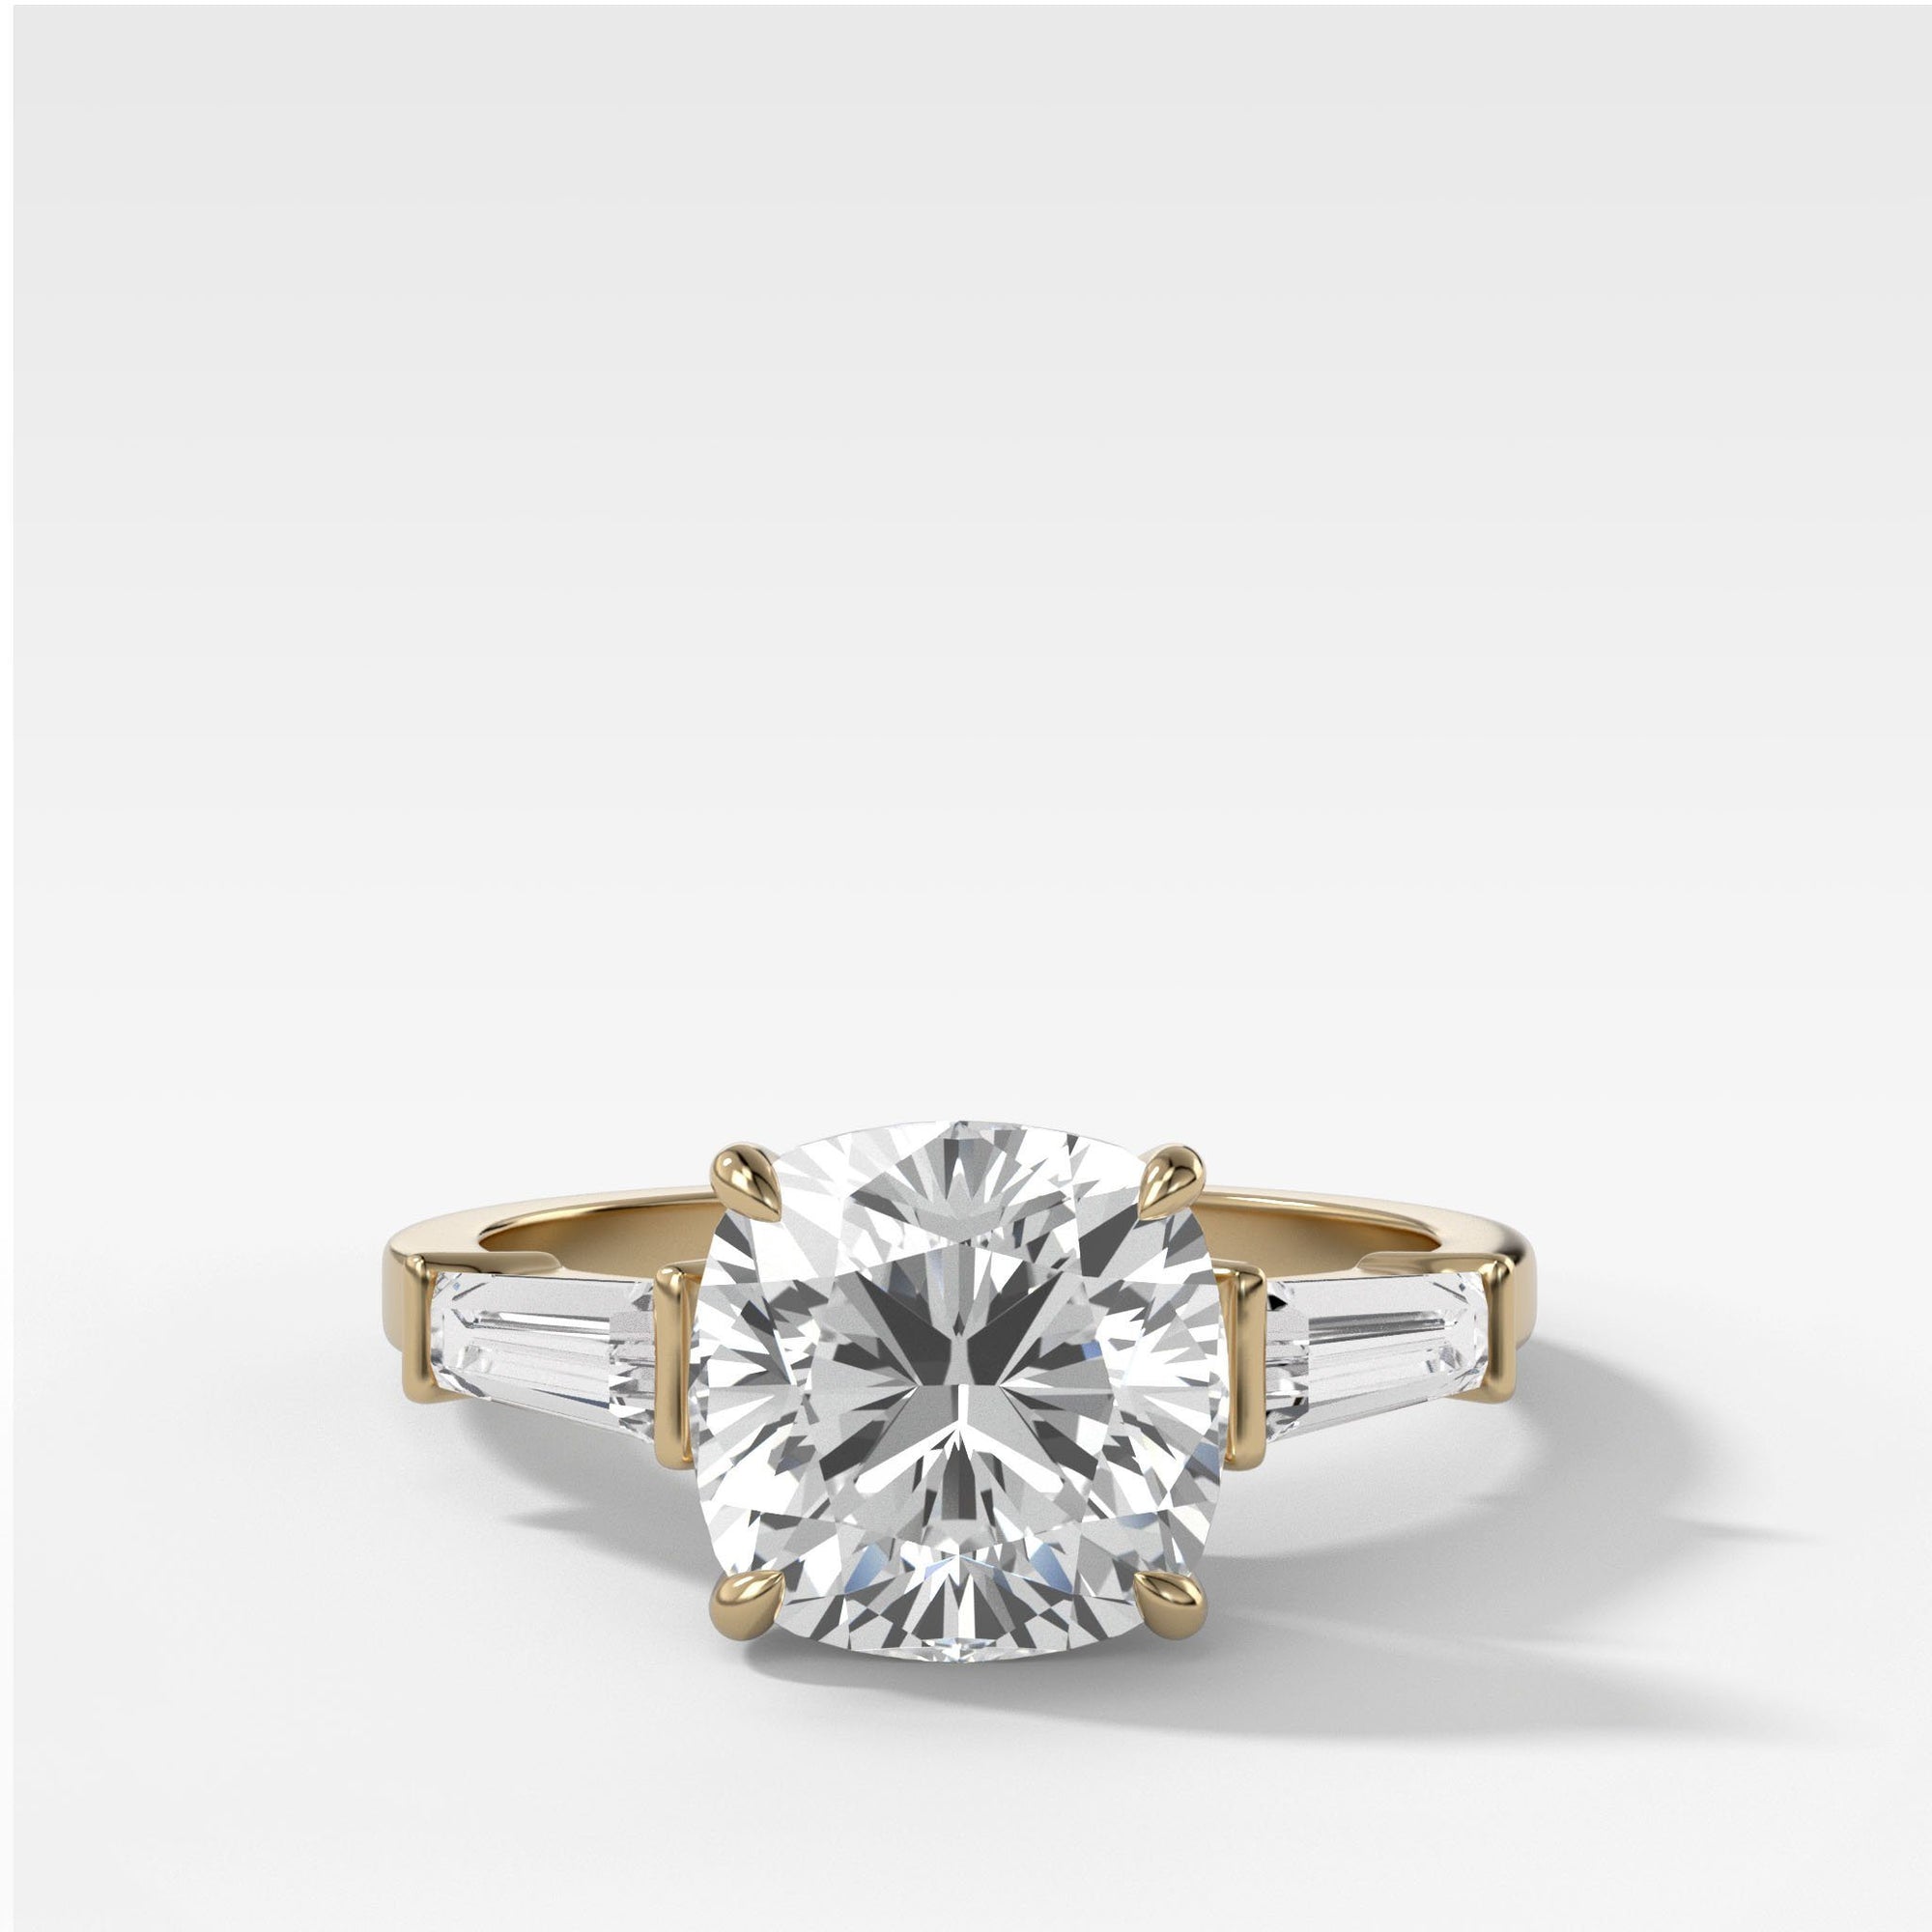 Translunar Tapered Baguette Engagement Ring With Cushion Cut by Good Stone in Yellow Gold